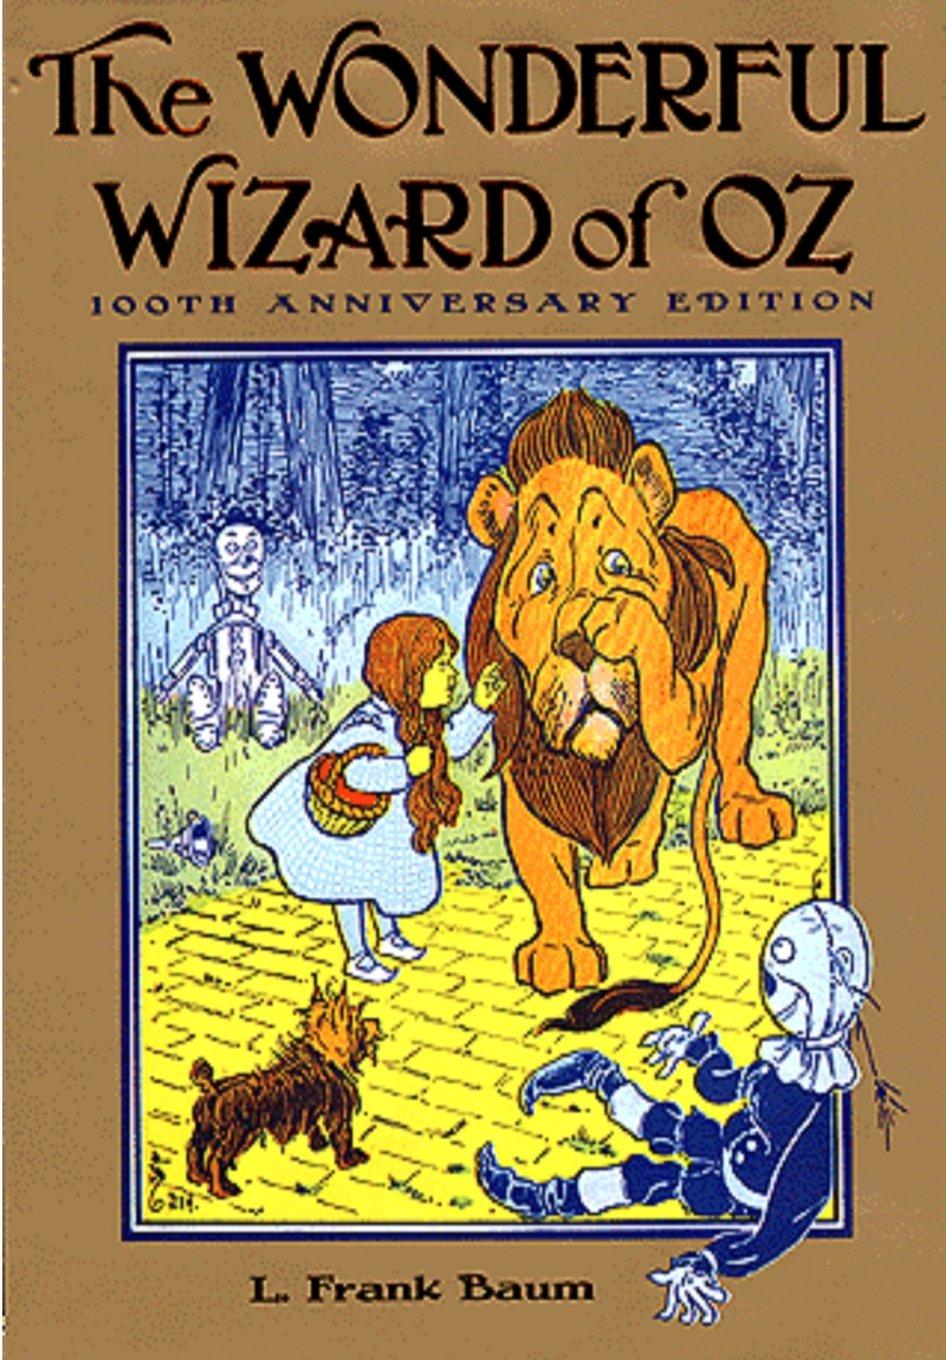 Illustrated book cover of "The Wonderful Wizard of Oz" by L. Frank Baum.